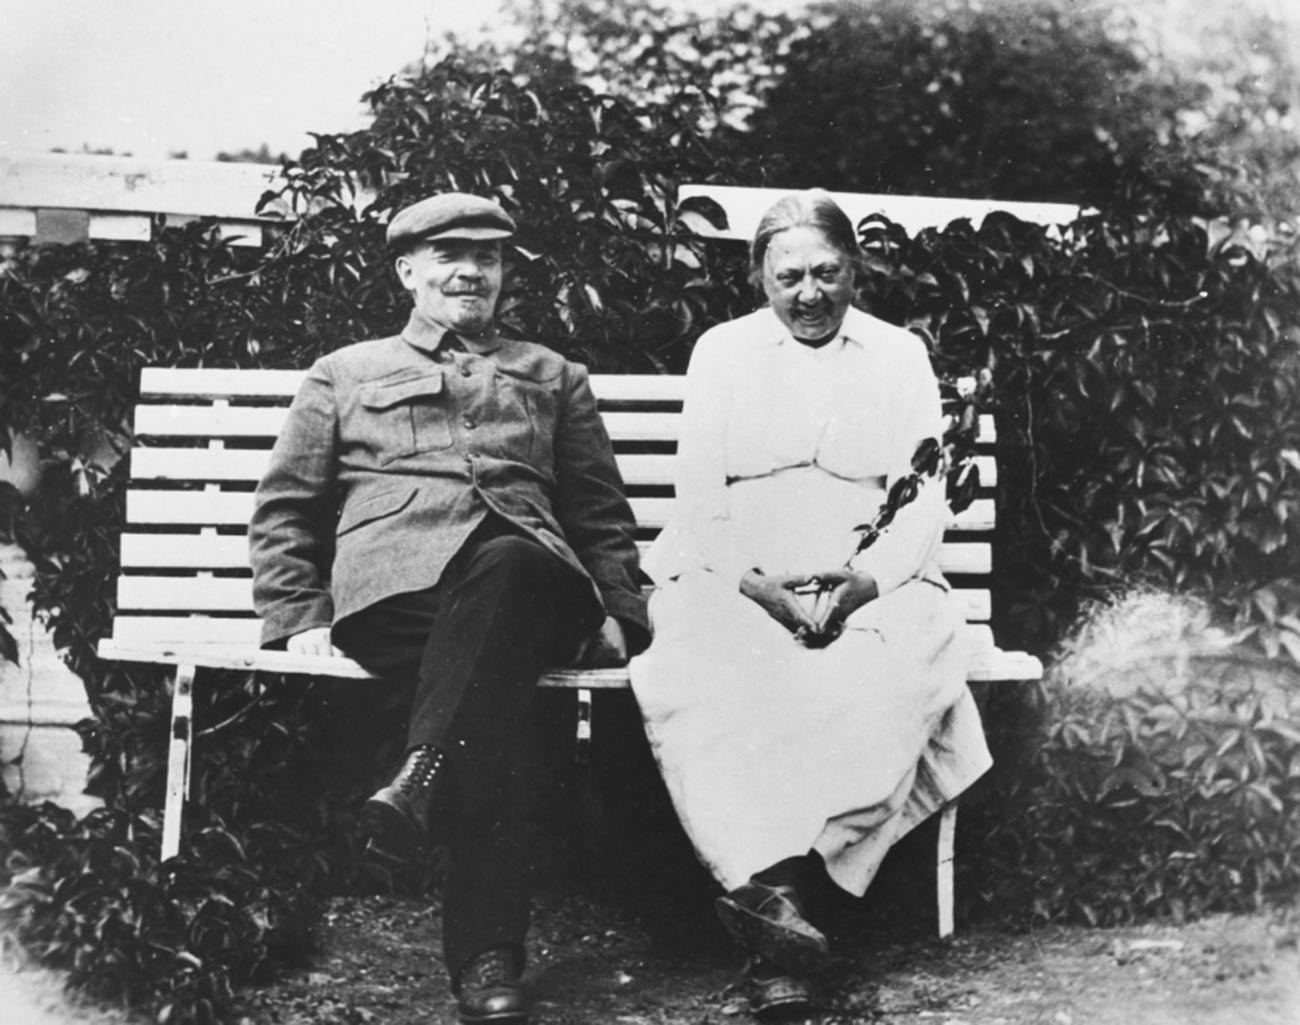 Vladimir Lenin and his wife in their countryside estate.